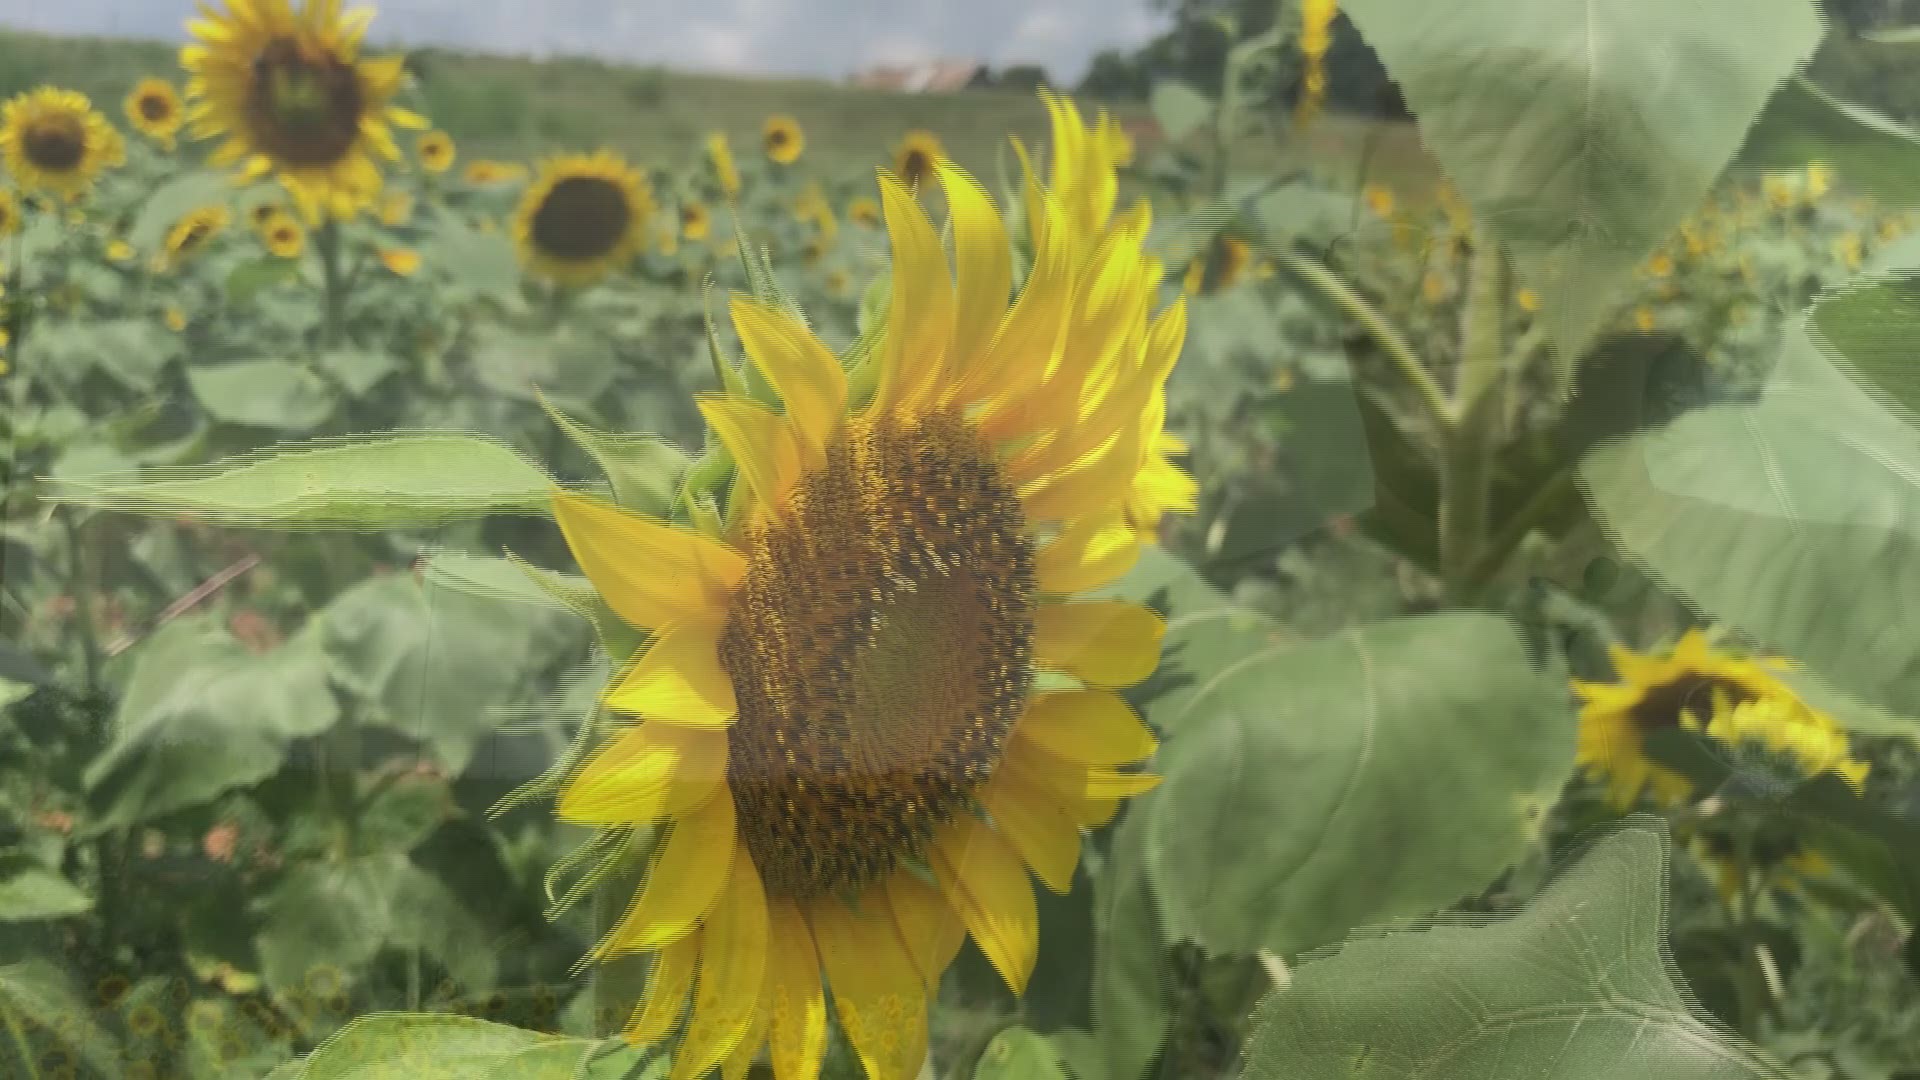 Milford Sunflower Farm bloomed a month early.